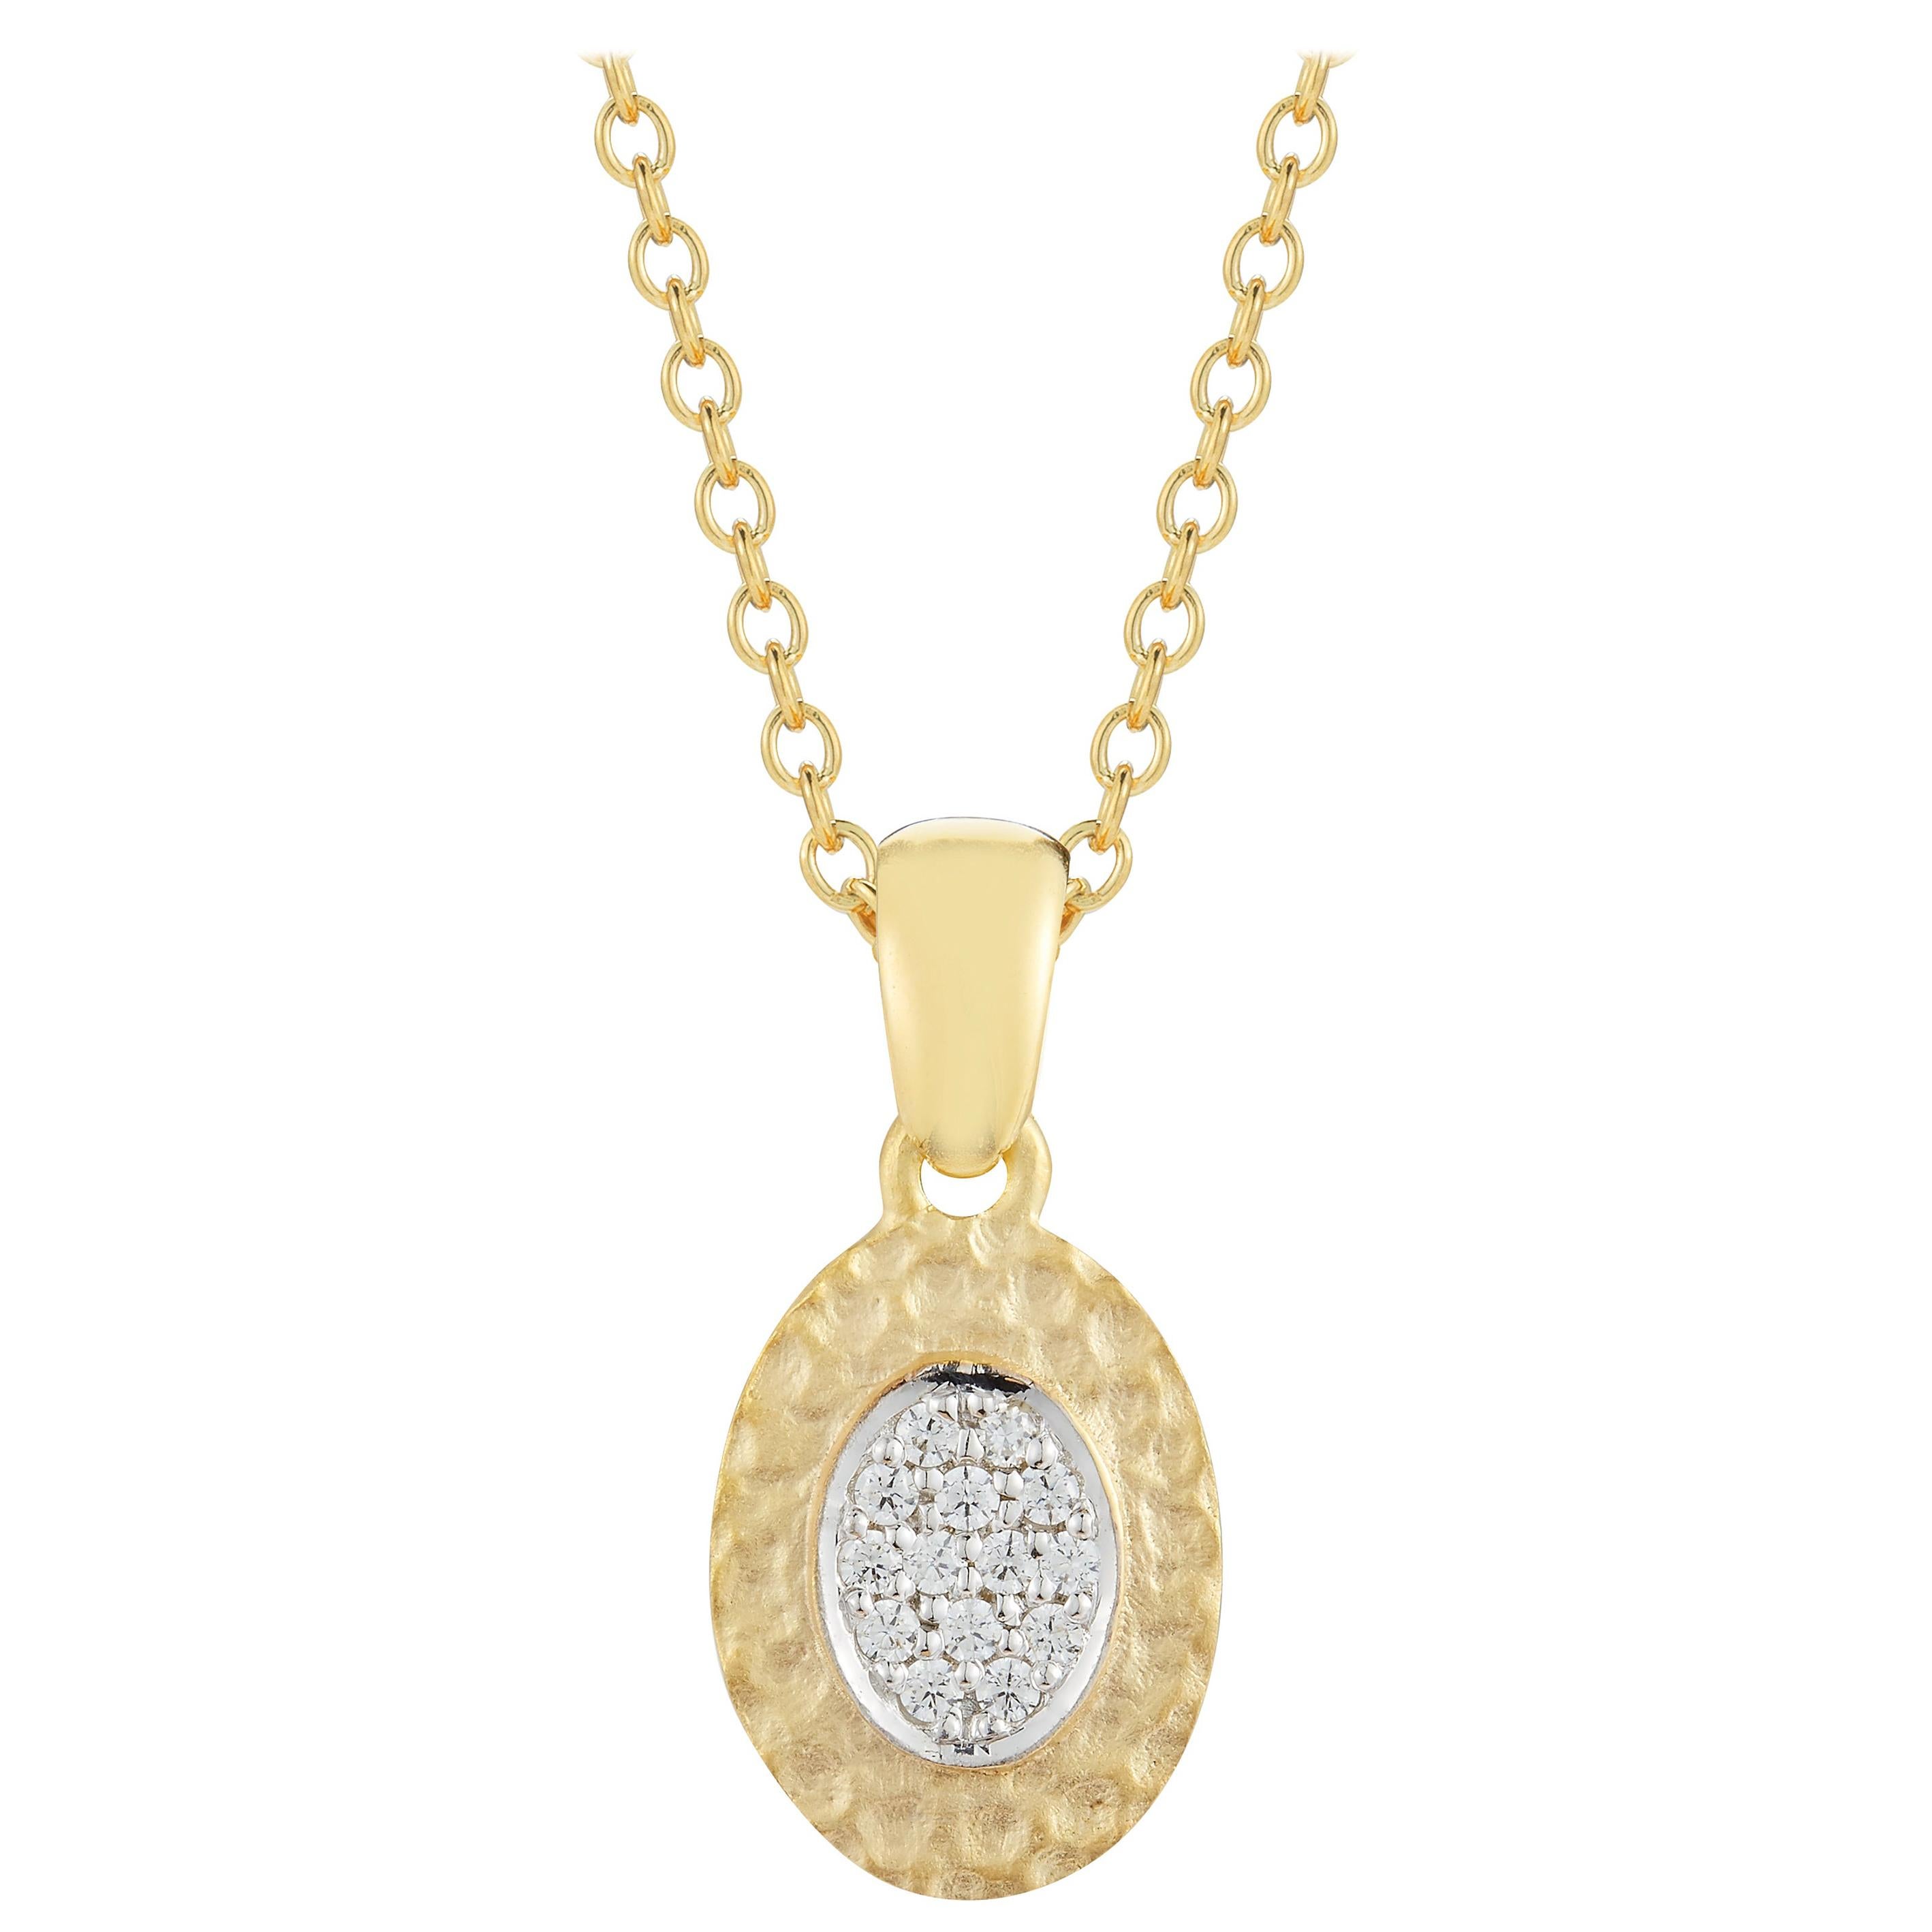 Handcrafted 14 Karat Yellow Gold Hammered Oval Pendant